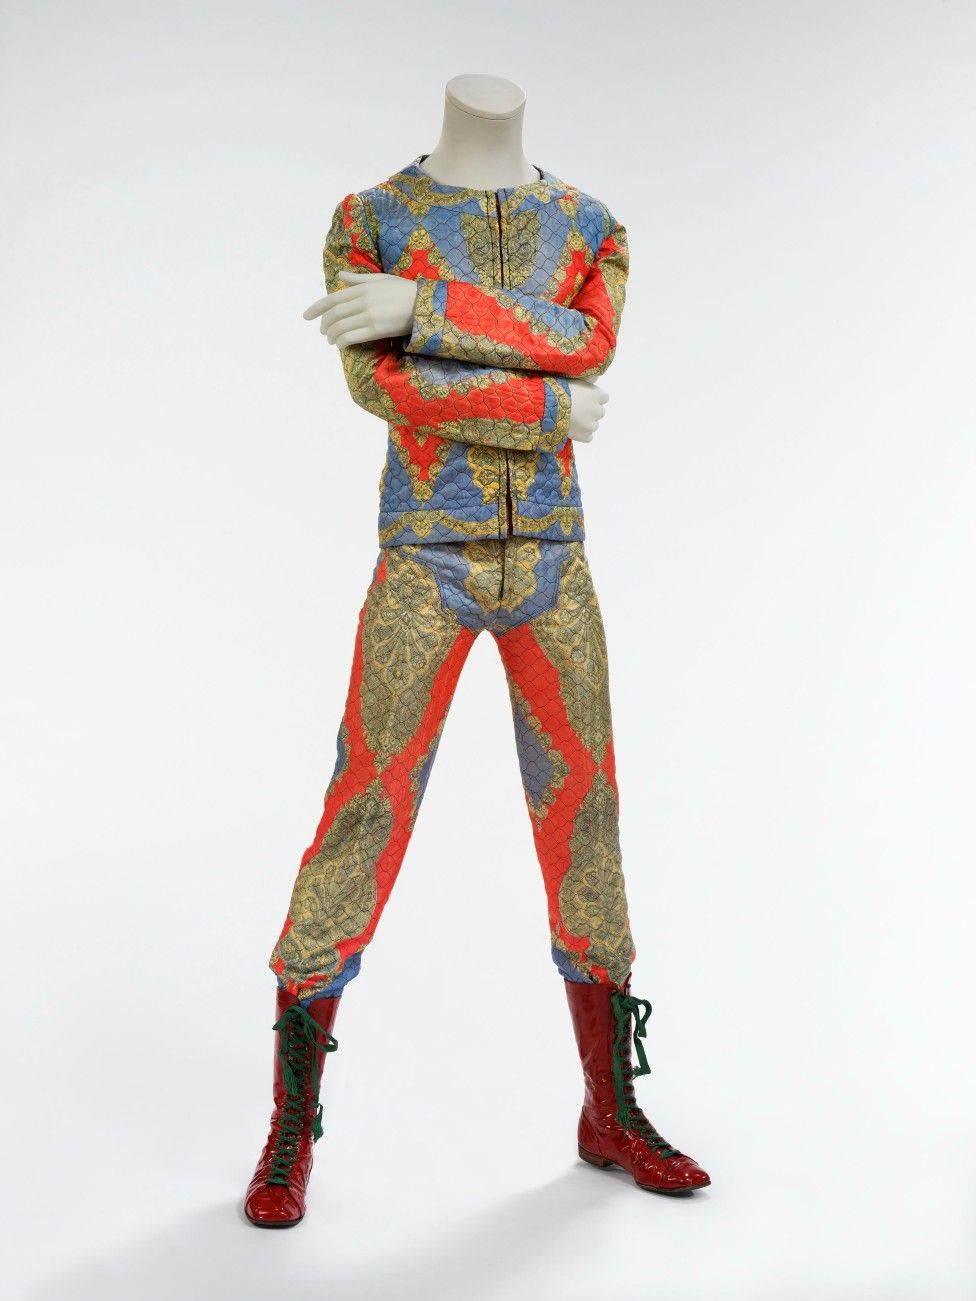 A colourful quilted outfit worn by Bowie in his Ziggy Stardust era, in the early 1970s